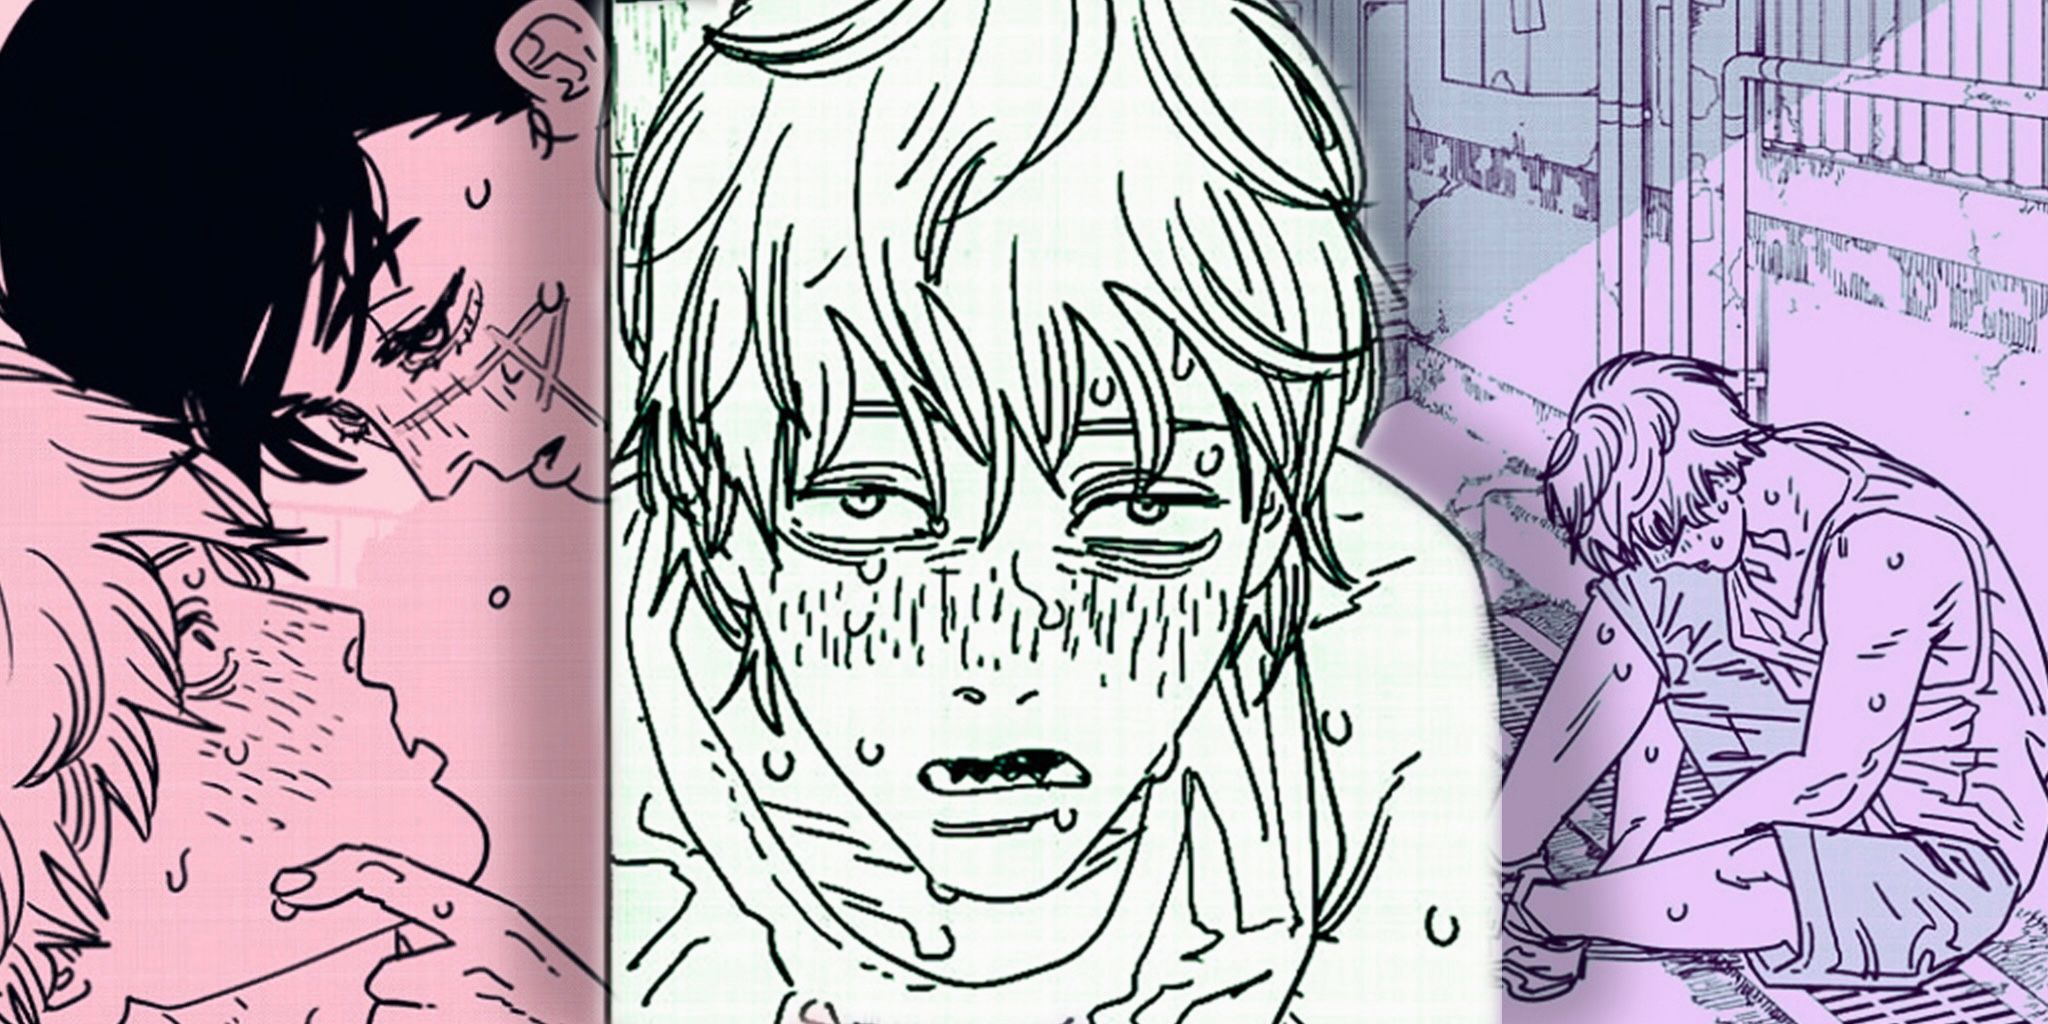 Denji looks scared as Yoru kisses him in the alleyway in Chainsaw Man Chapter 168